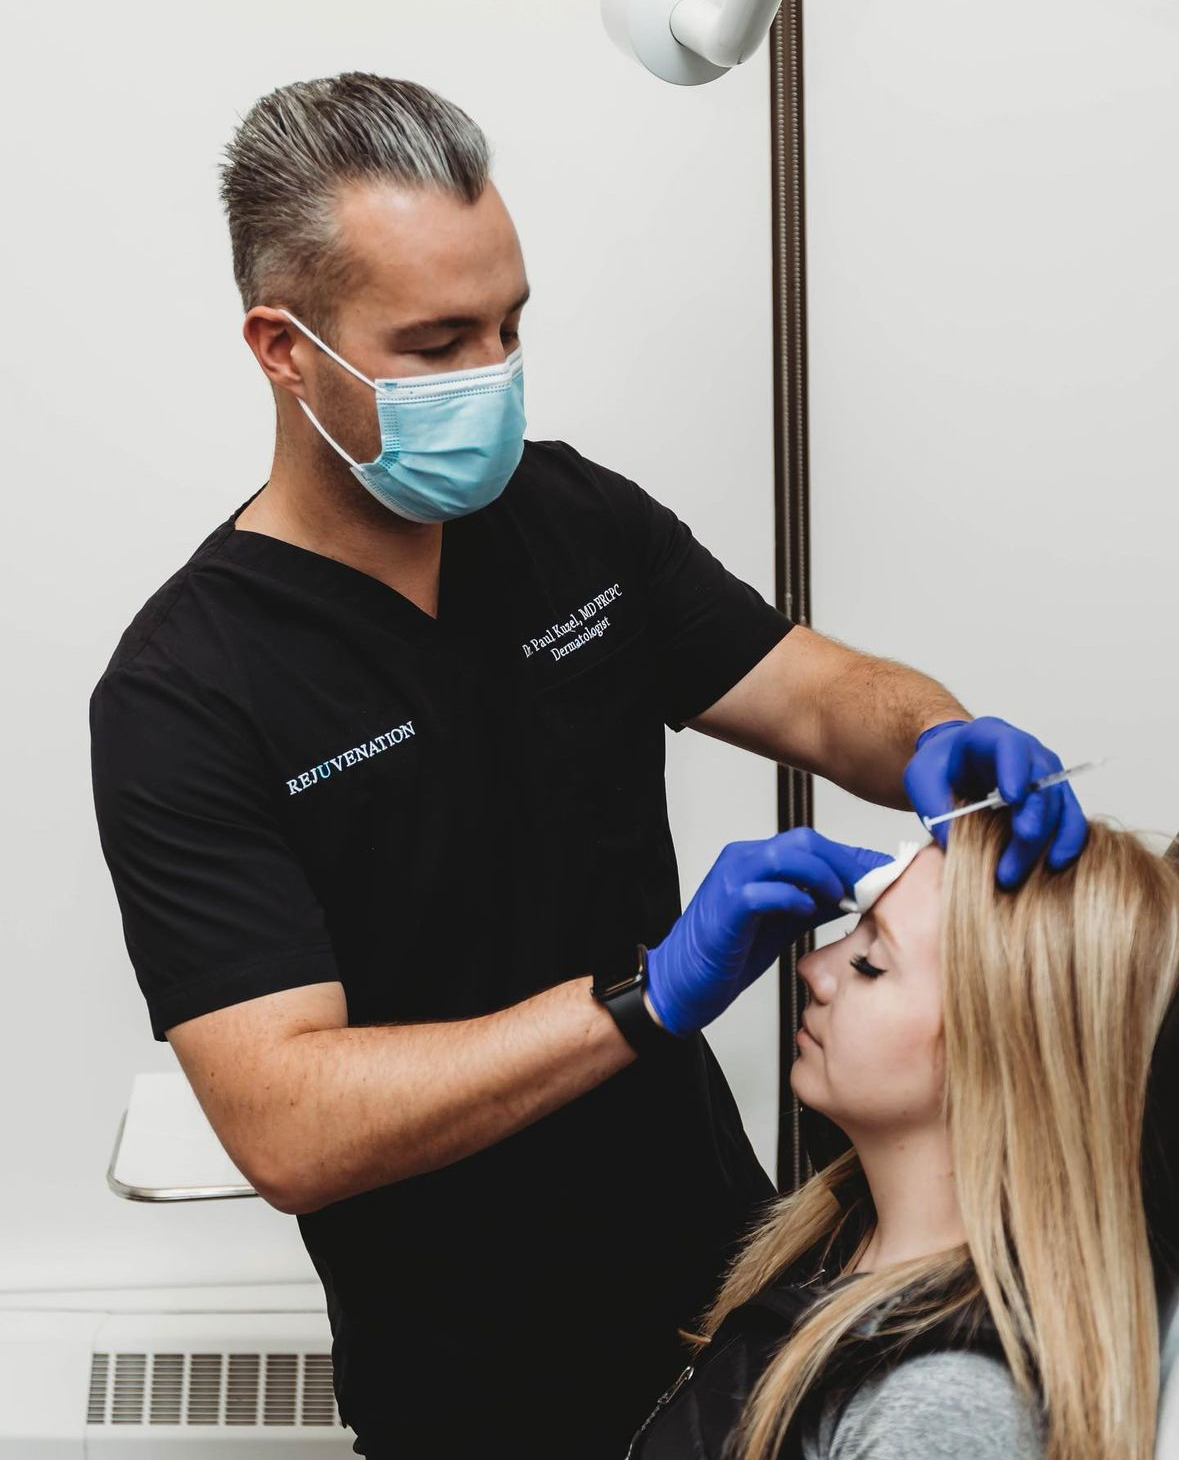 A doctor wearing a face mask and blue gloves is performing a cosmetic Botox® procedure on a female patient. The doctor is holding a syringe and applying a cotton pad to the patient's forehead, indicating the administration of an injectable treatment. The patient, with long blonde hair, is sitting in a chair, appearing calm and relaxed. The doctor is dressed in black scrubs, with "REJUVENATION" embroidered on one side and his name and title on the other. The setting is a clinical environment.